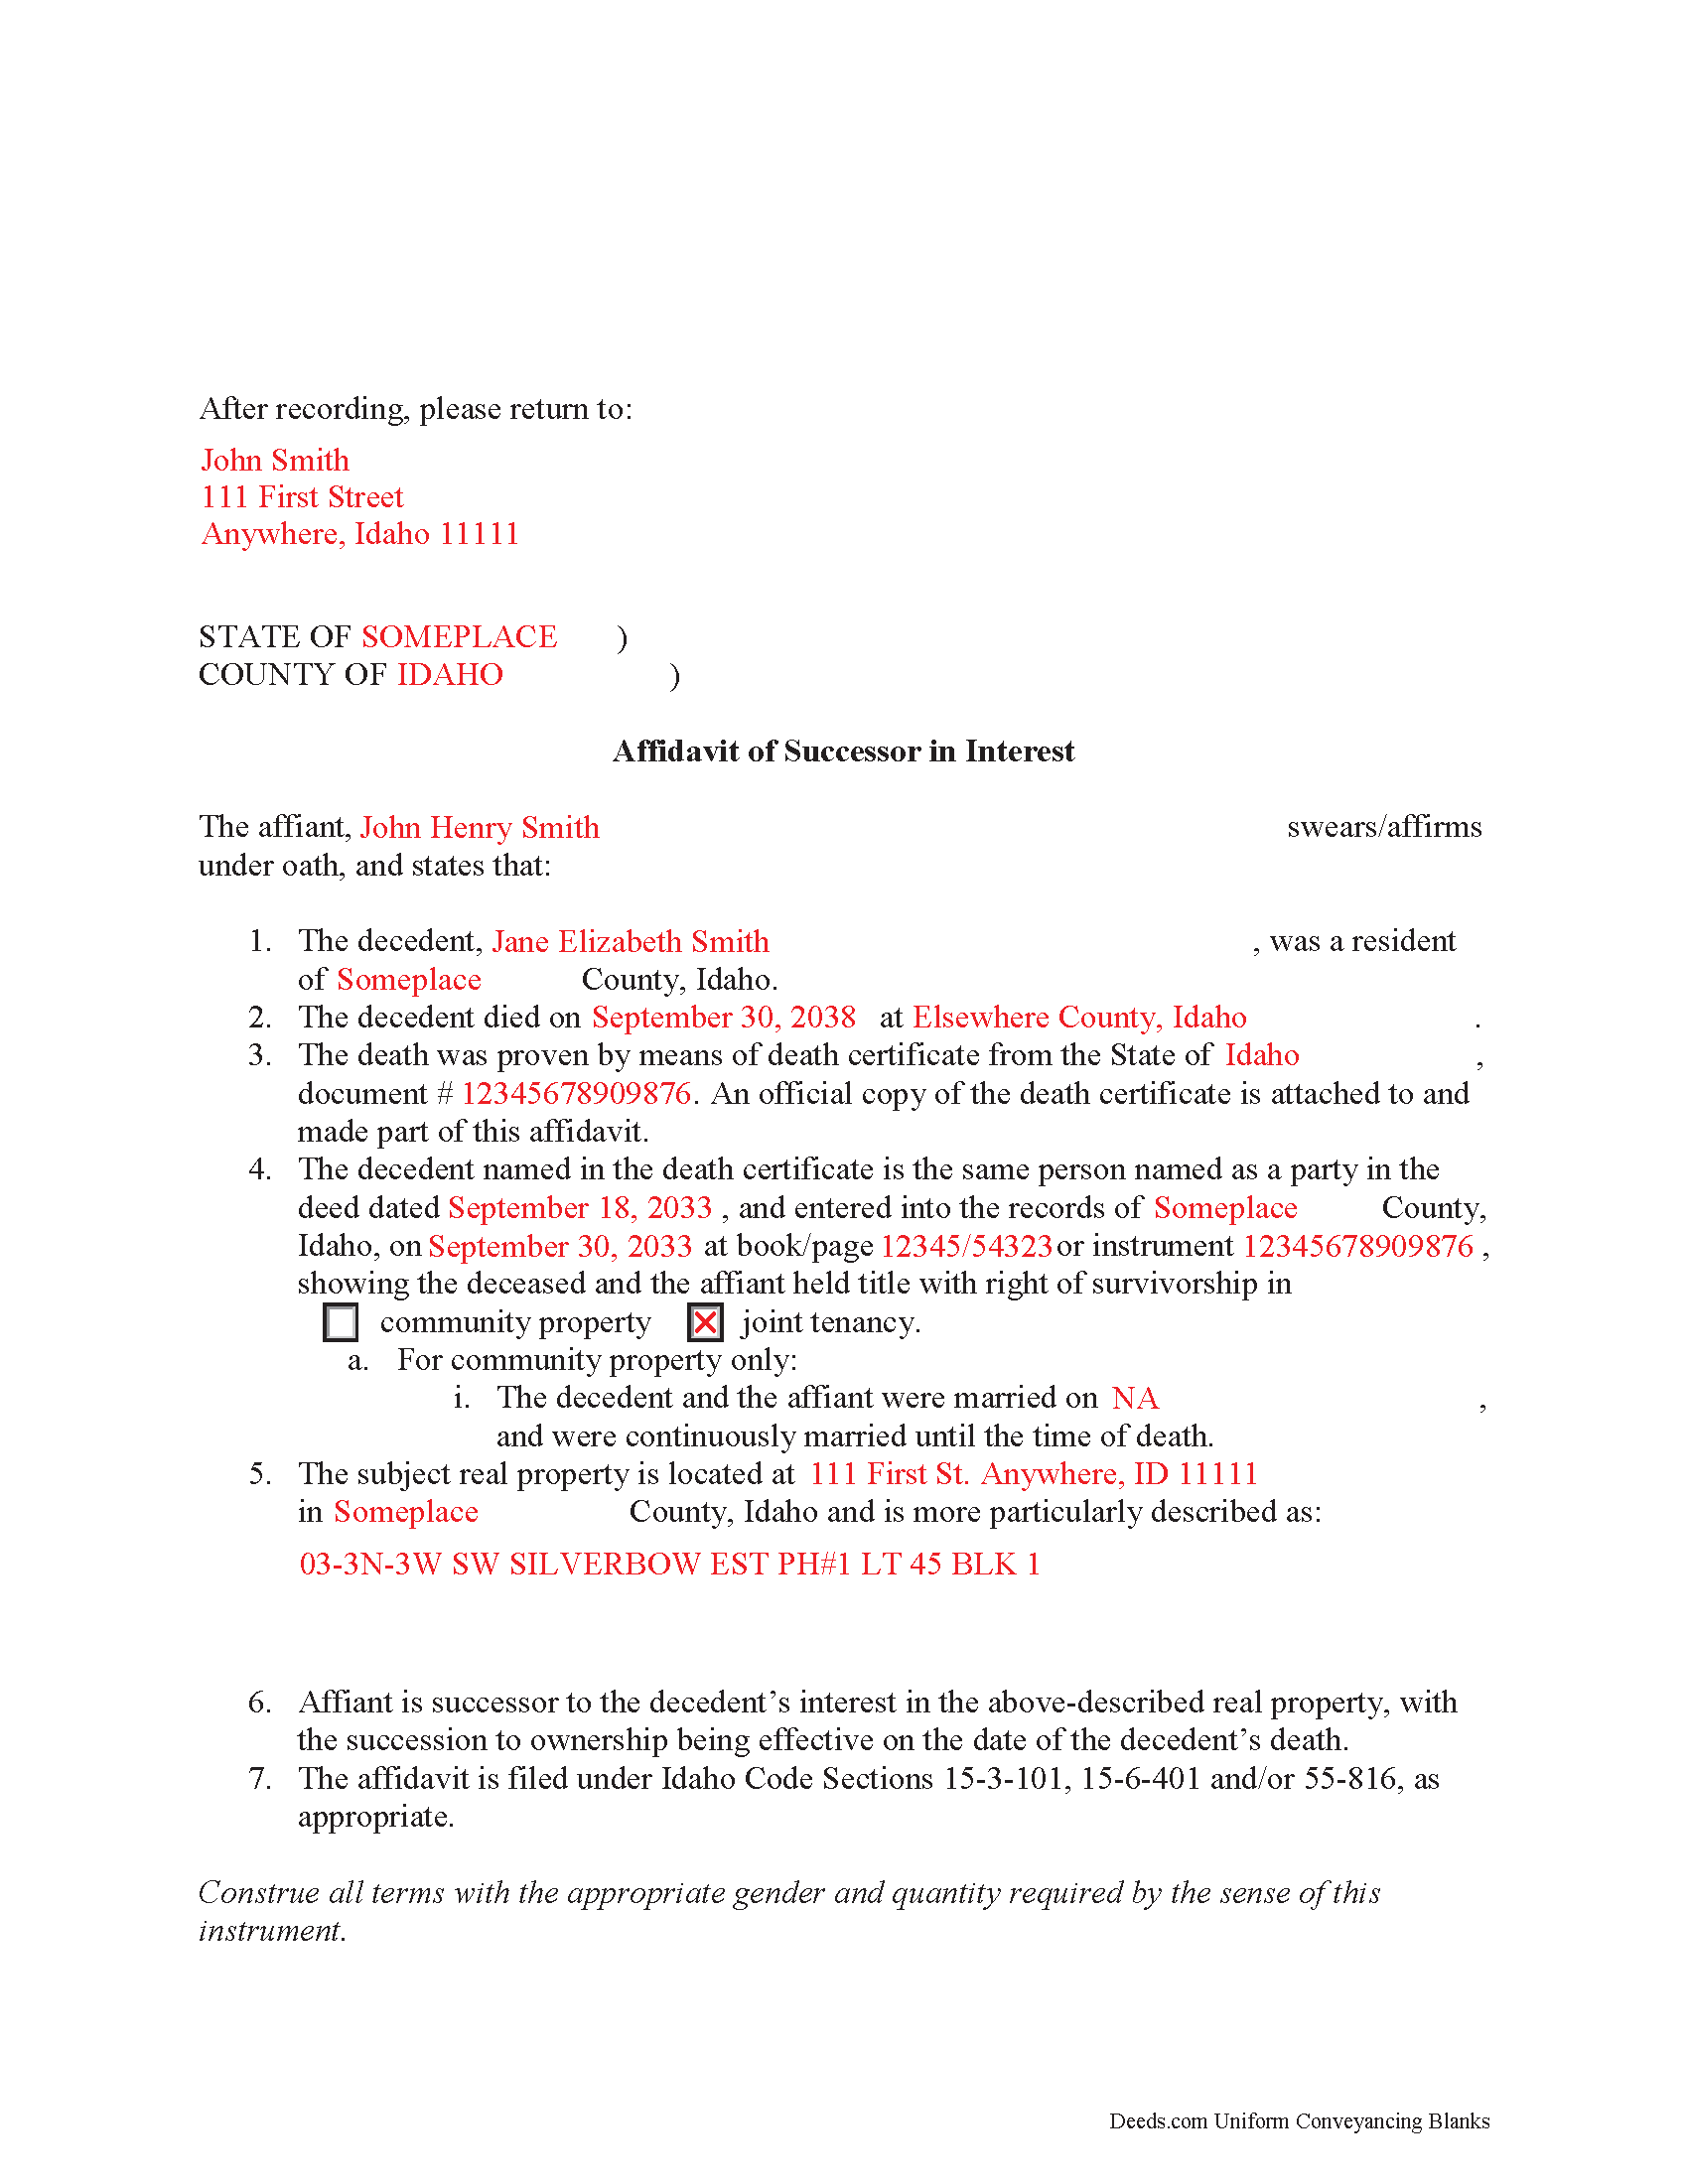 Completed Example of the Affidavit of Successor Document